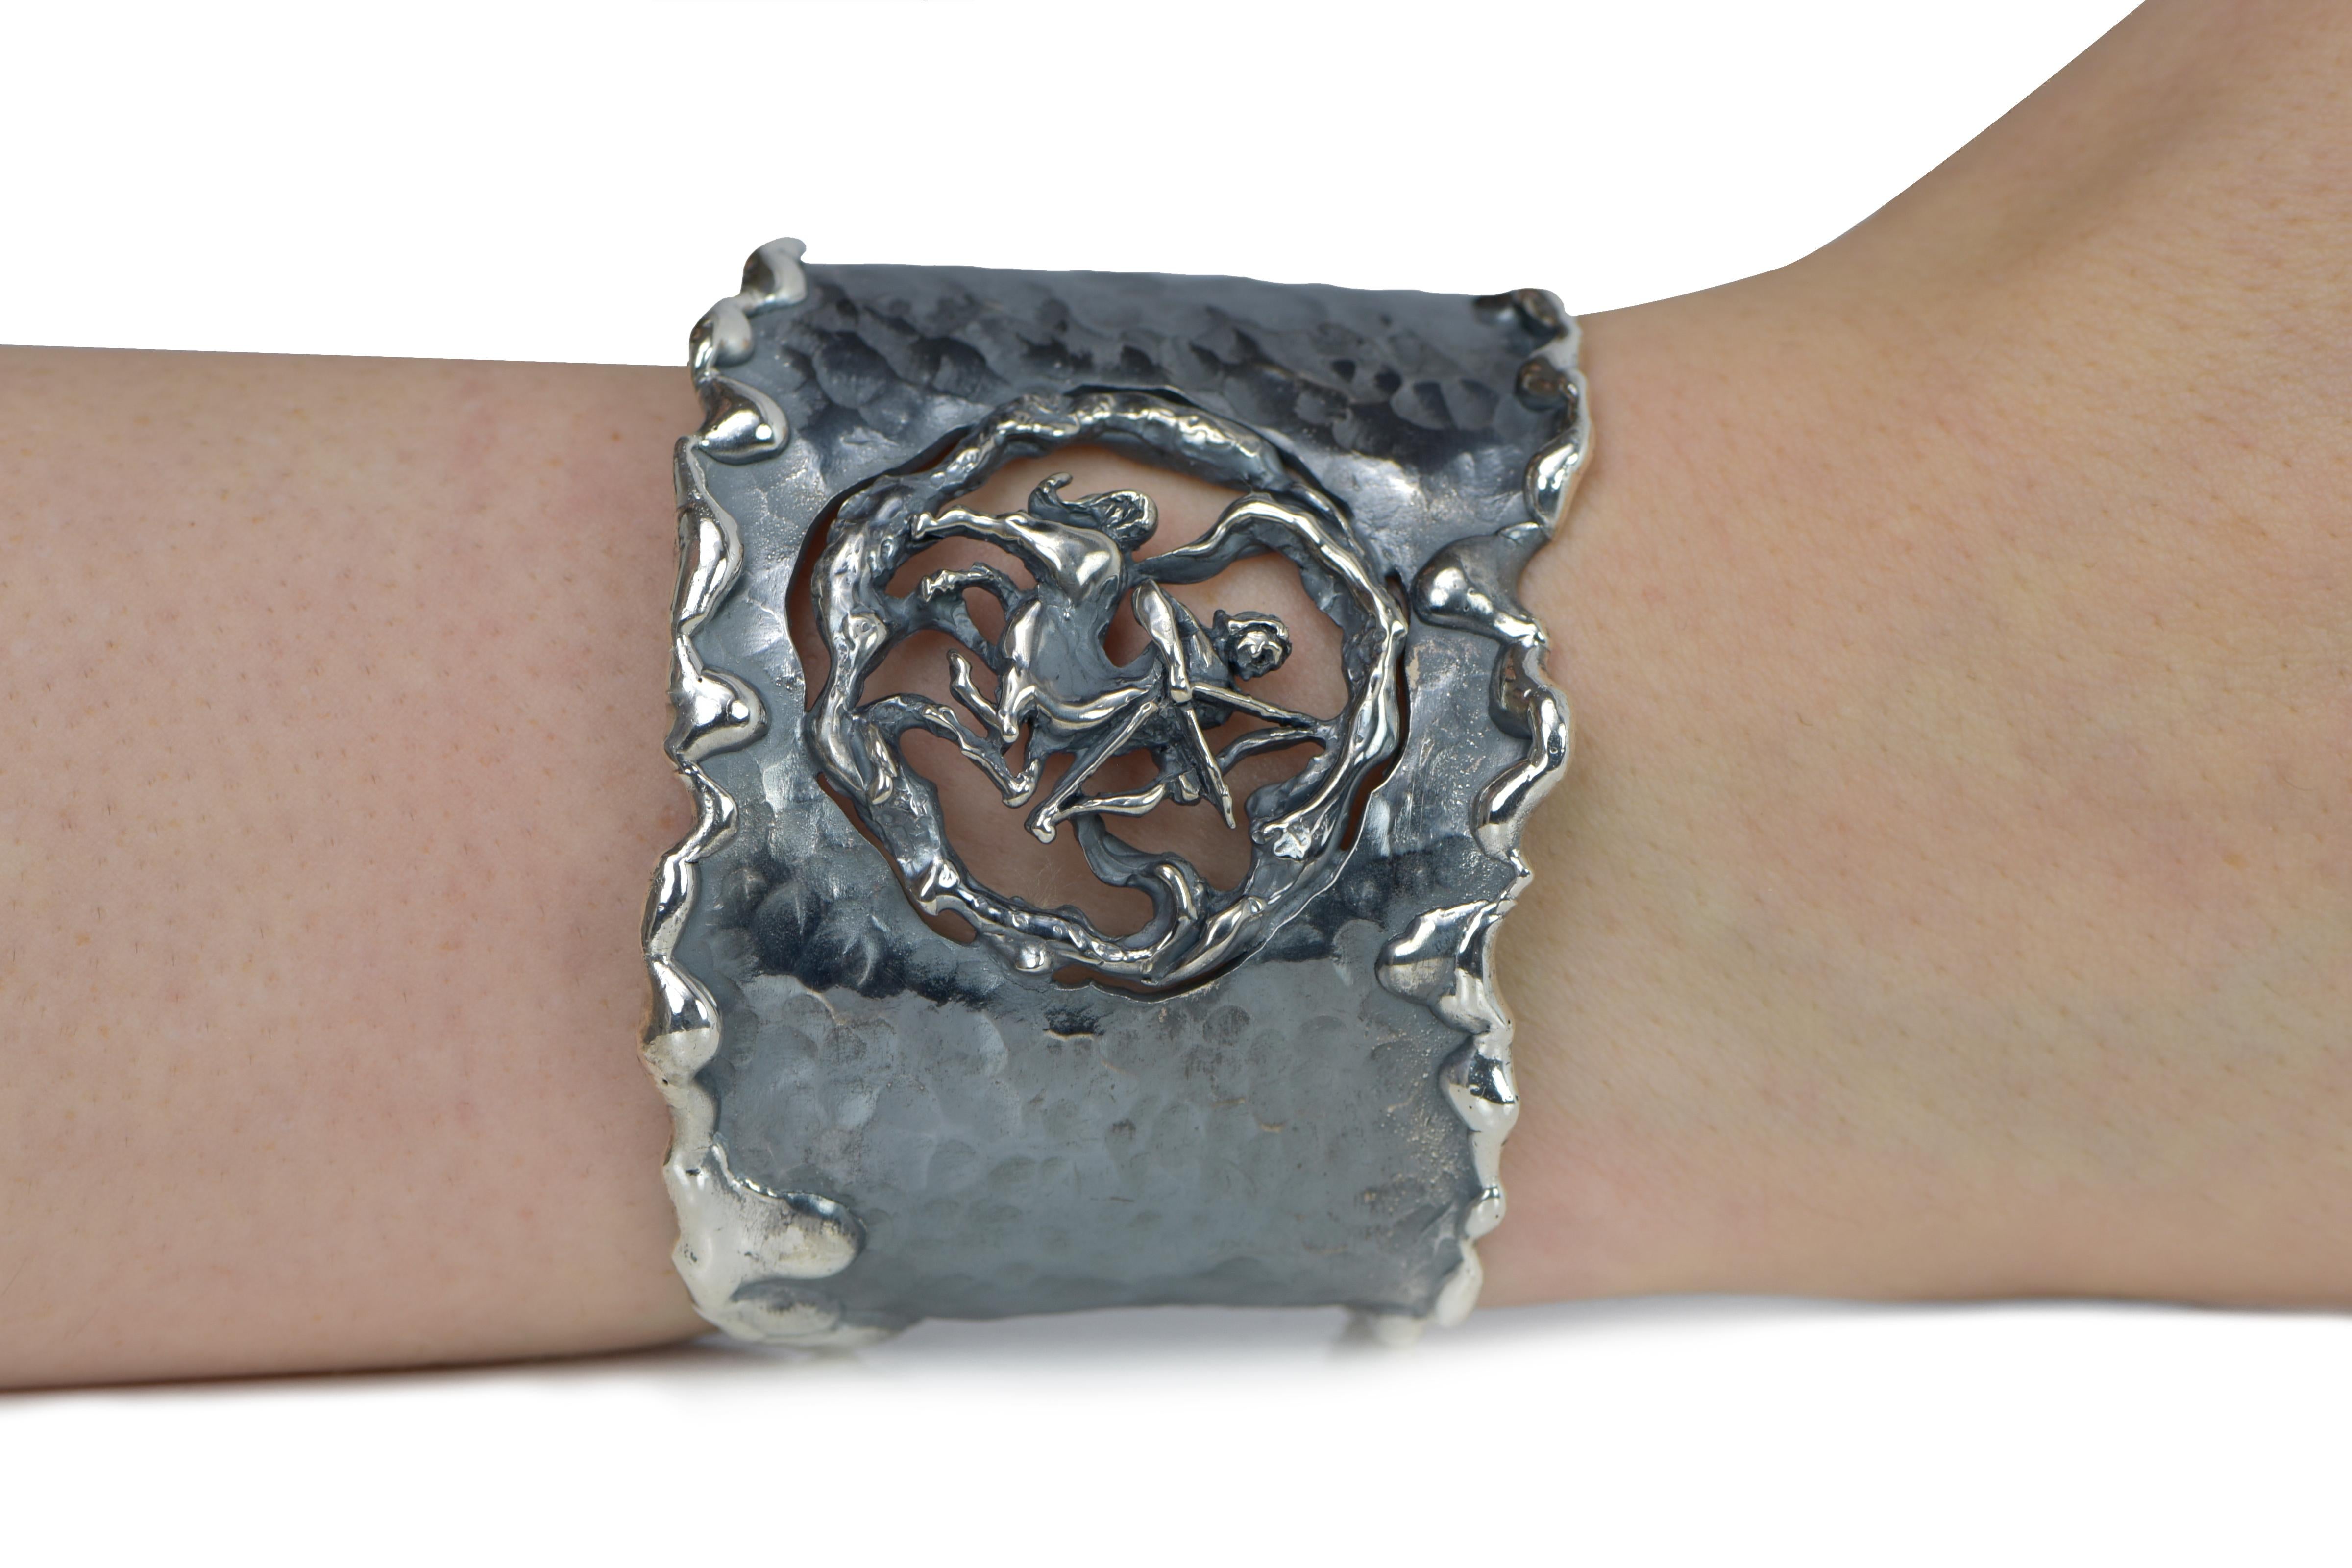 Hand Forged Silver Sagittarius Adjustable Cuff Bracelet. About 2.5 inches wide. The metal does not contain any additional alloys that could compromise the strength or quality of the piece. Each Organic Silver Cuff Bracelet takes about 8 hours to